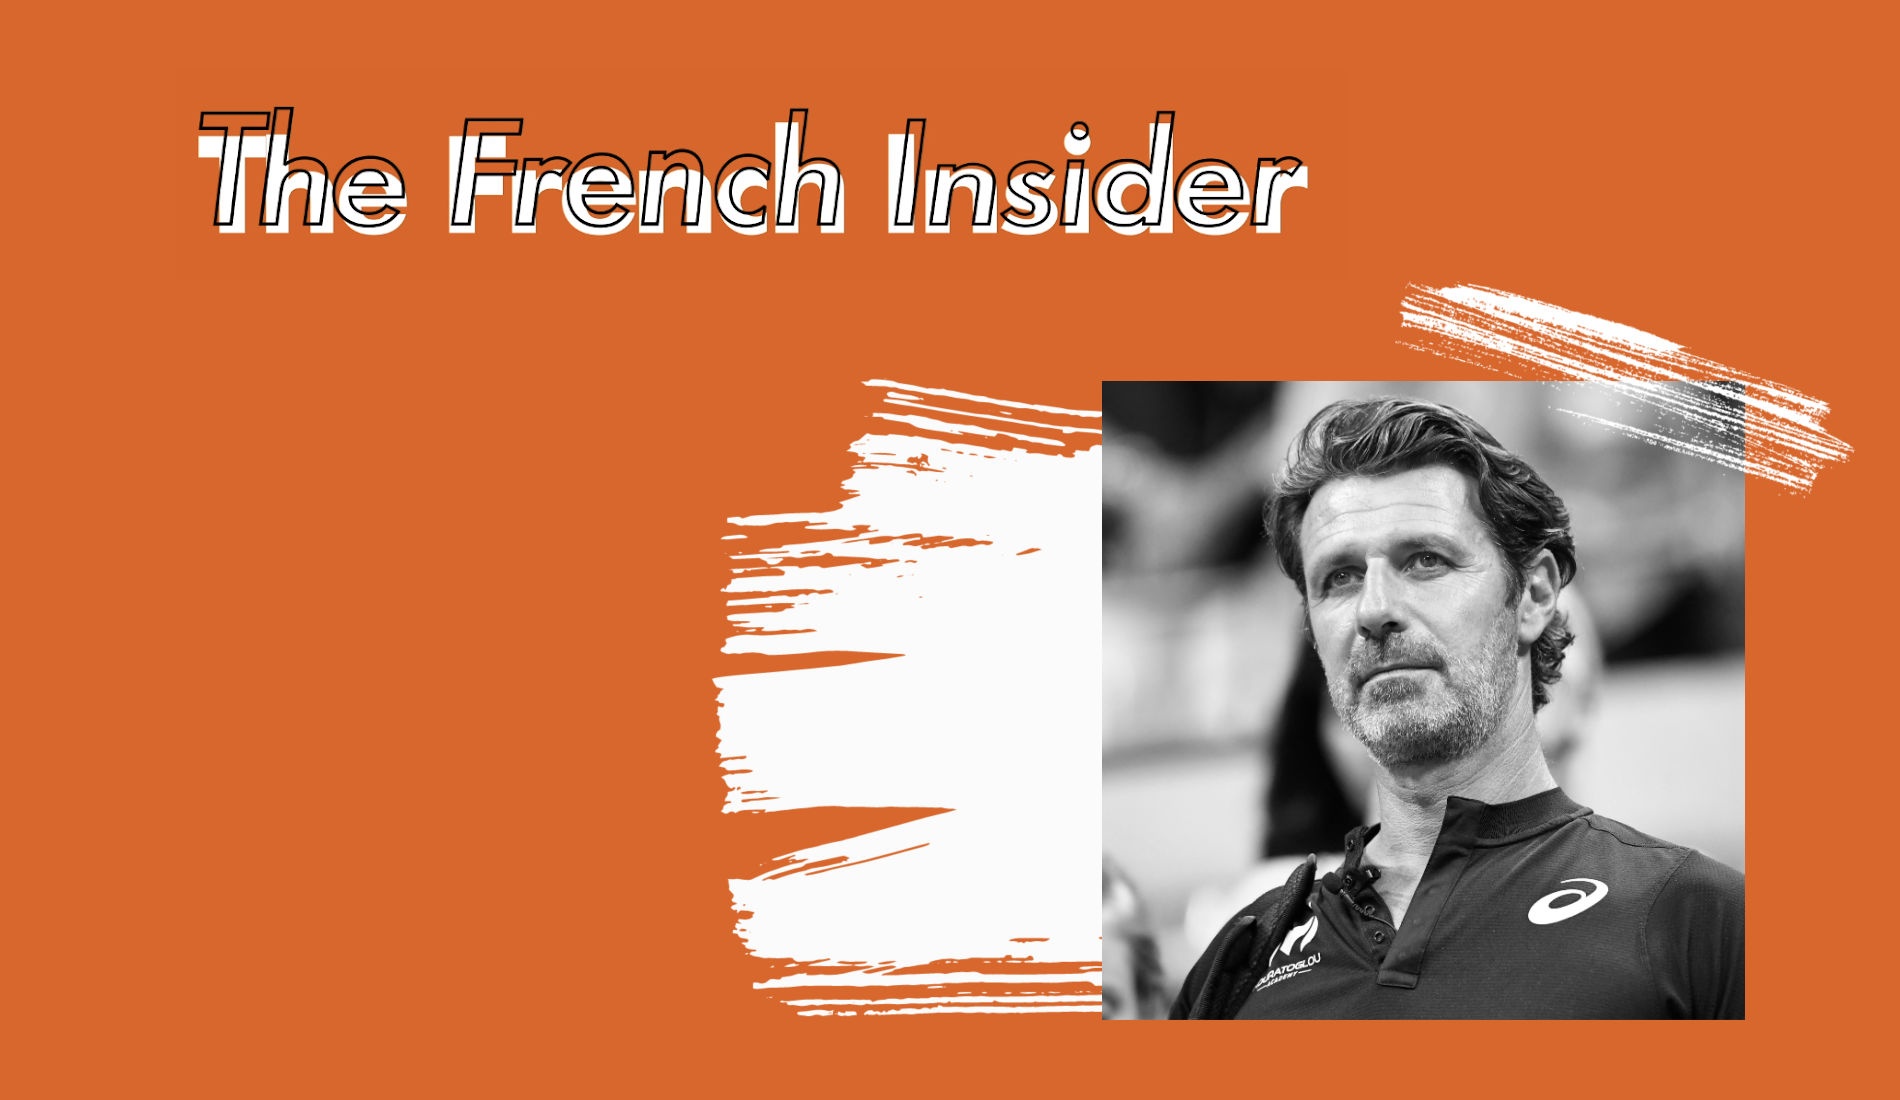 The French Insider #1: Patrick Mouratoglou